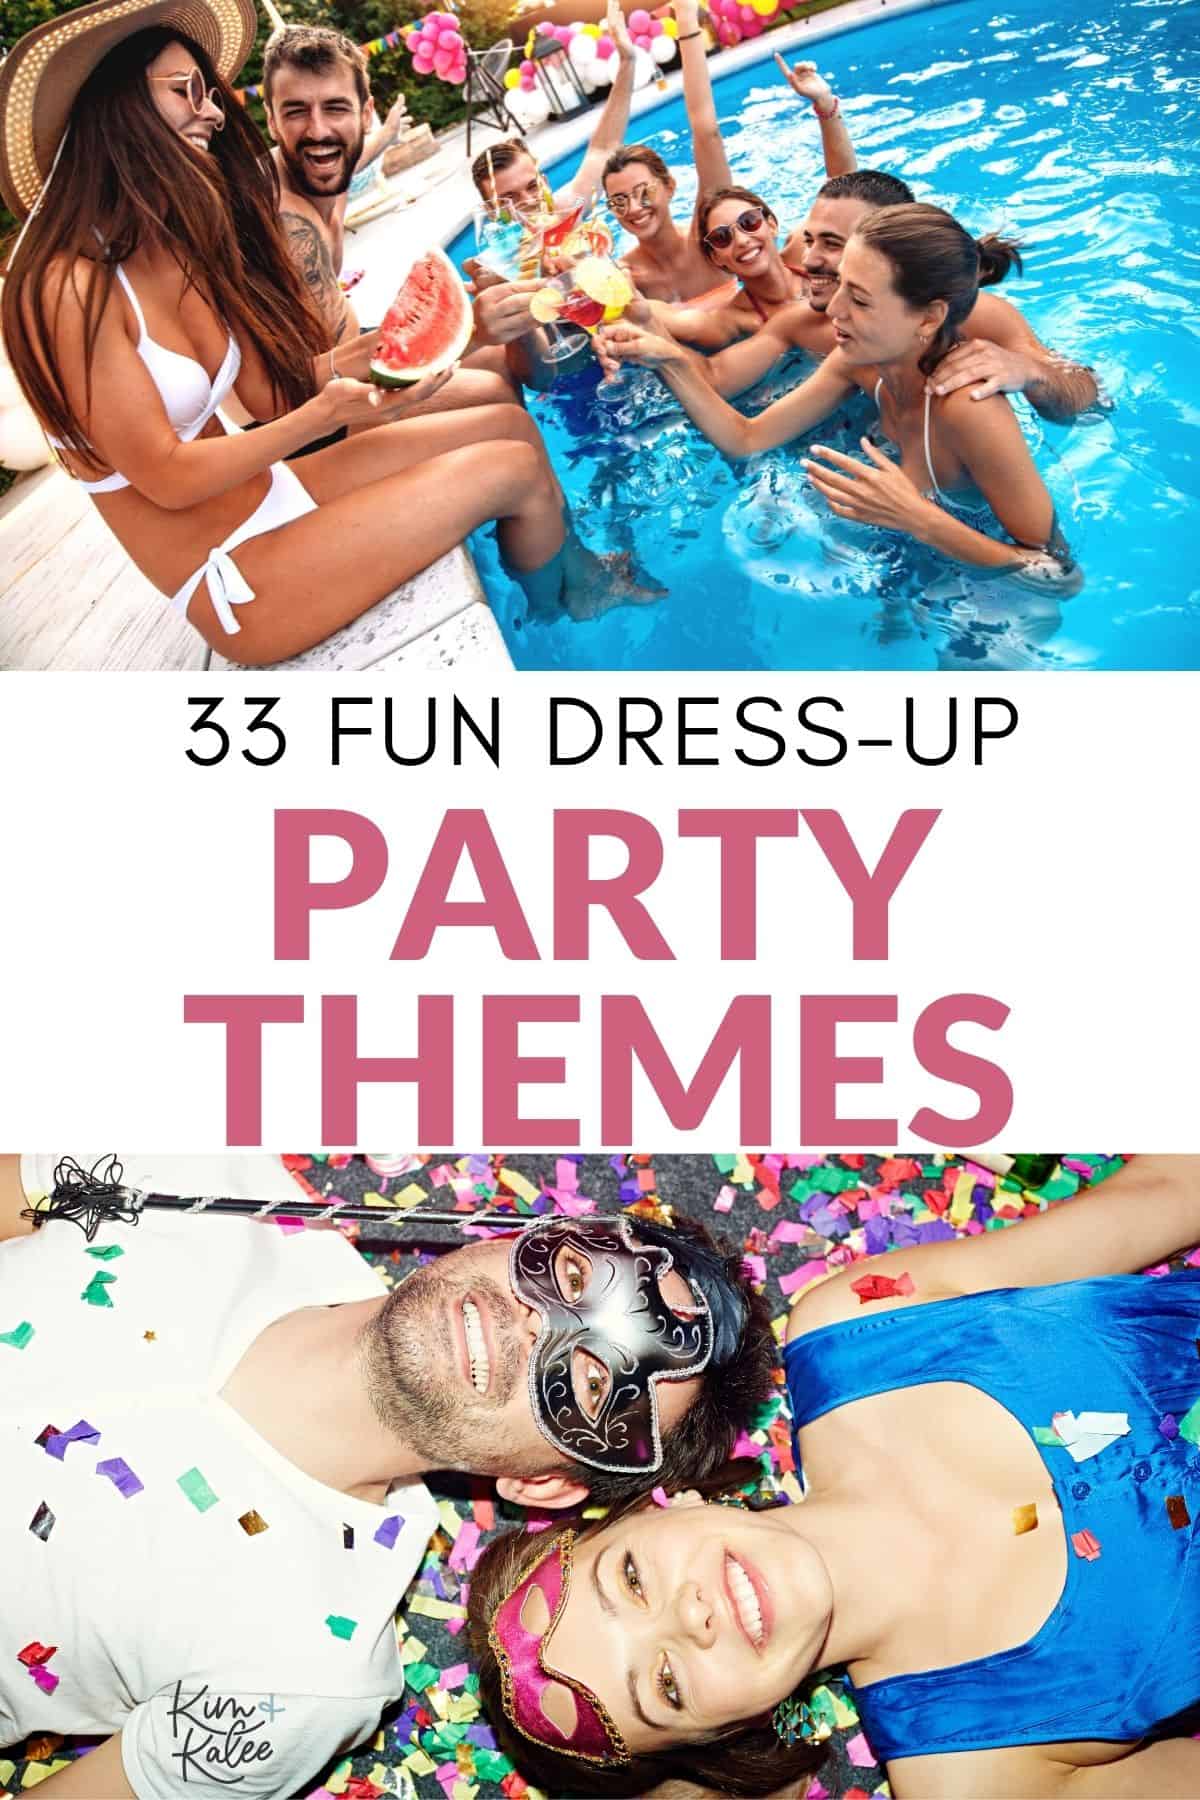 themed party dress code ideas